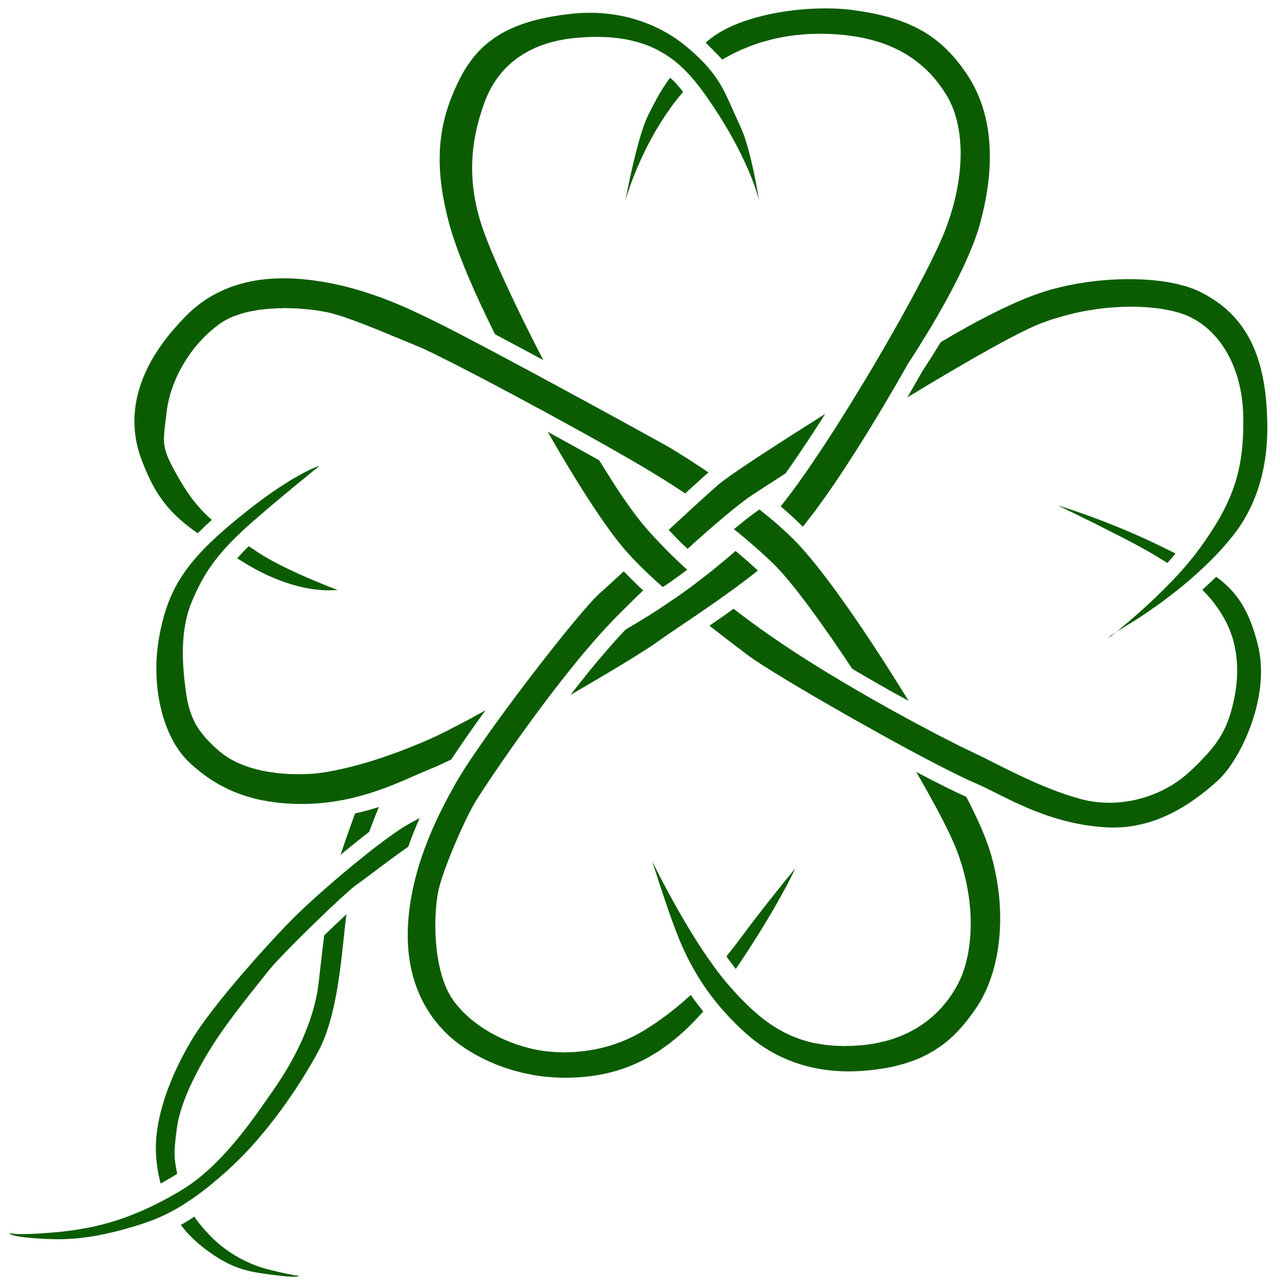 22 four leaf clover art. Free cliparts that you can download to you computer and use in your designs. Leaf Clover Tattoo Designs - Free Download Tattoo ...